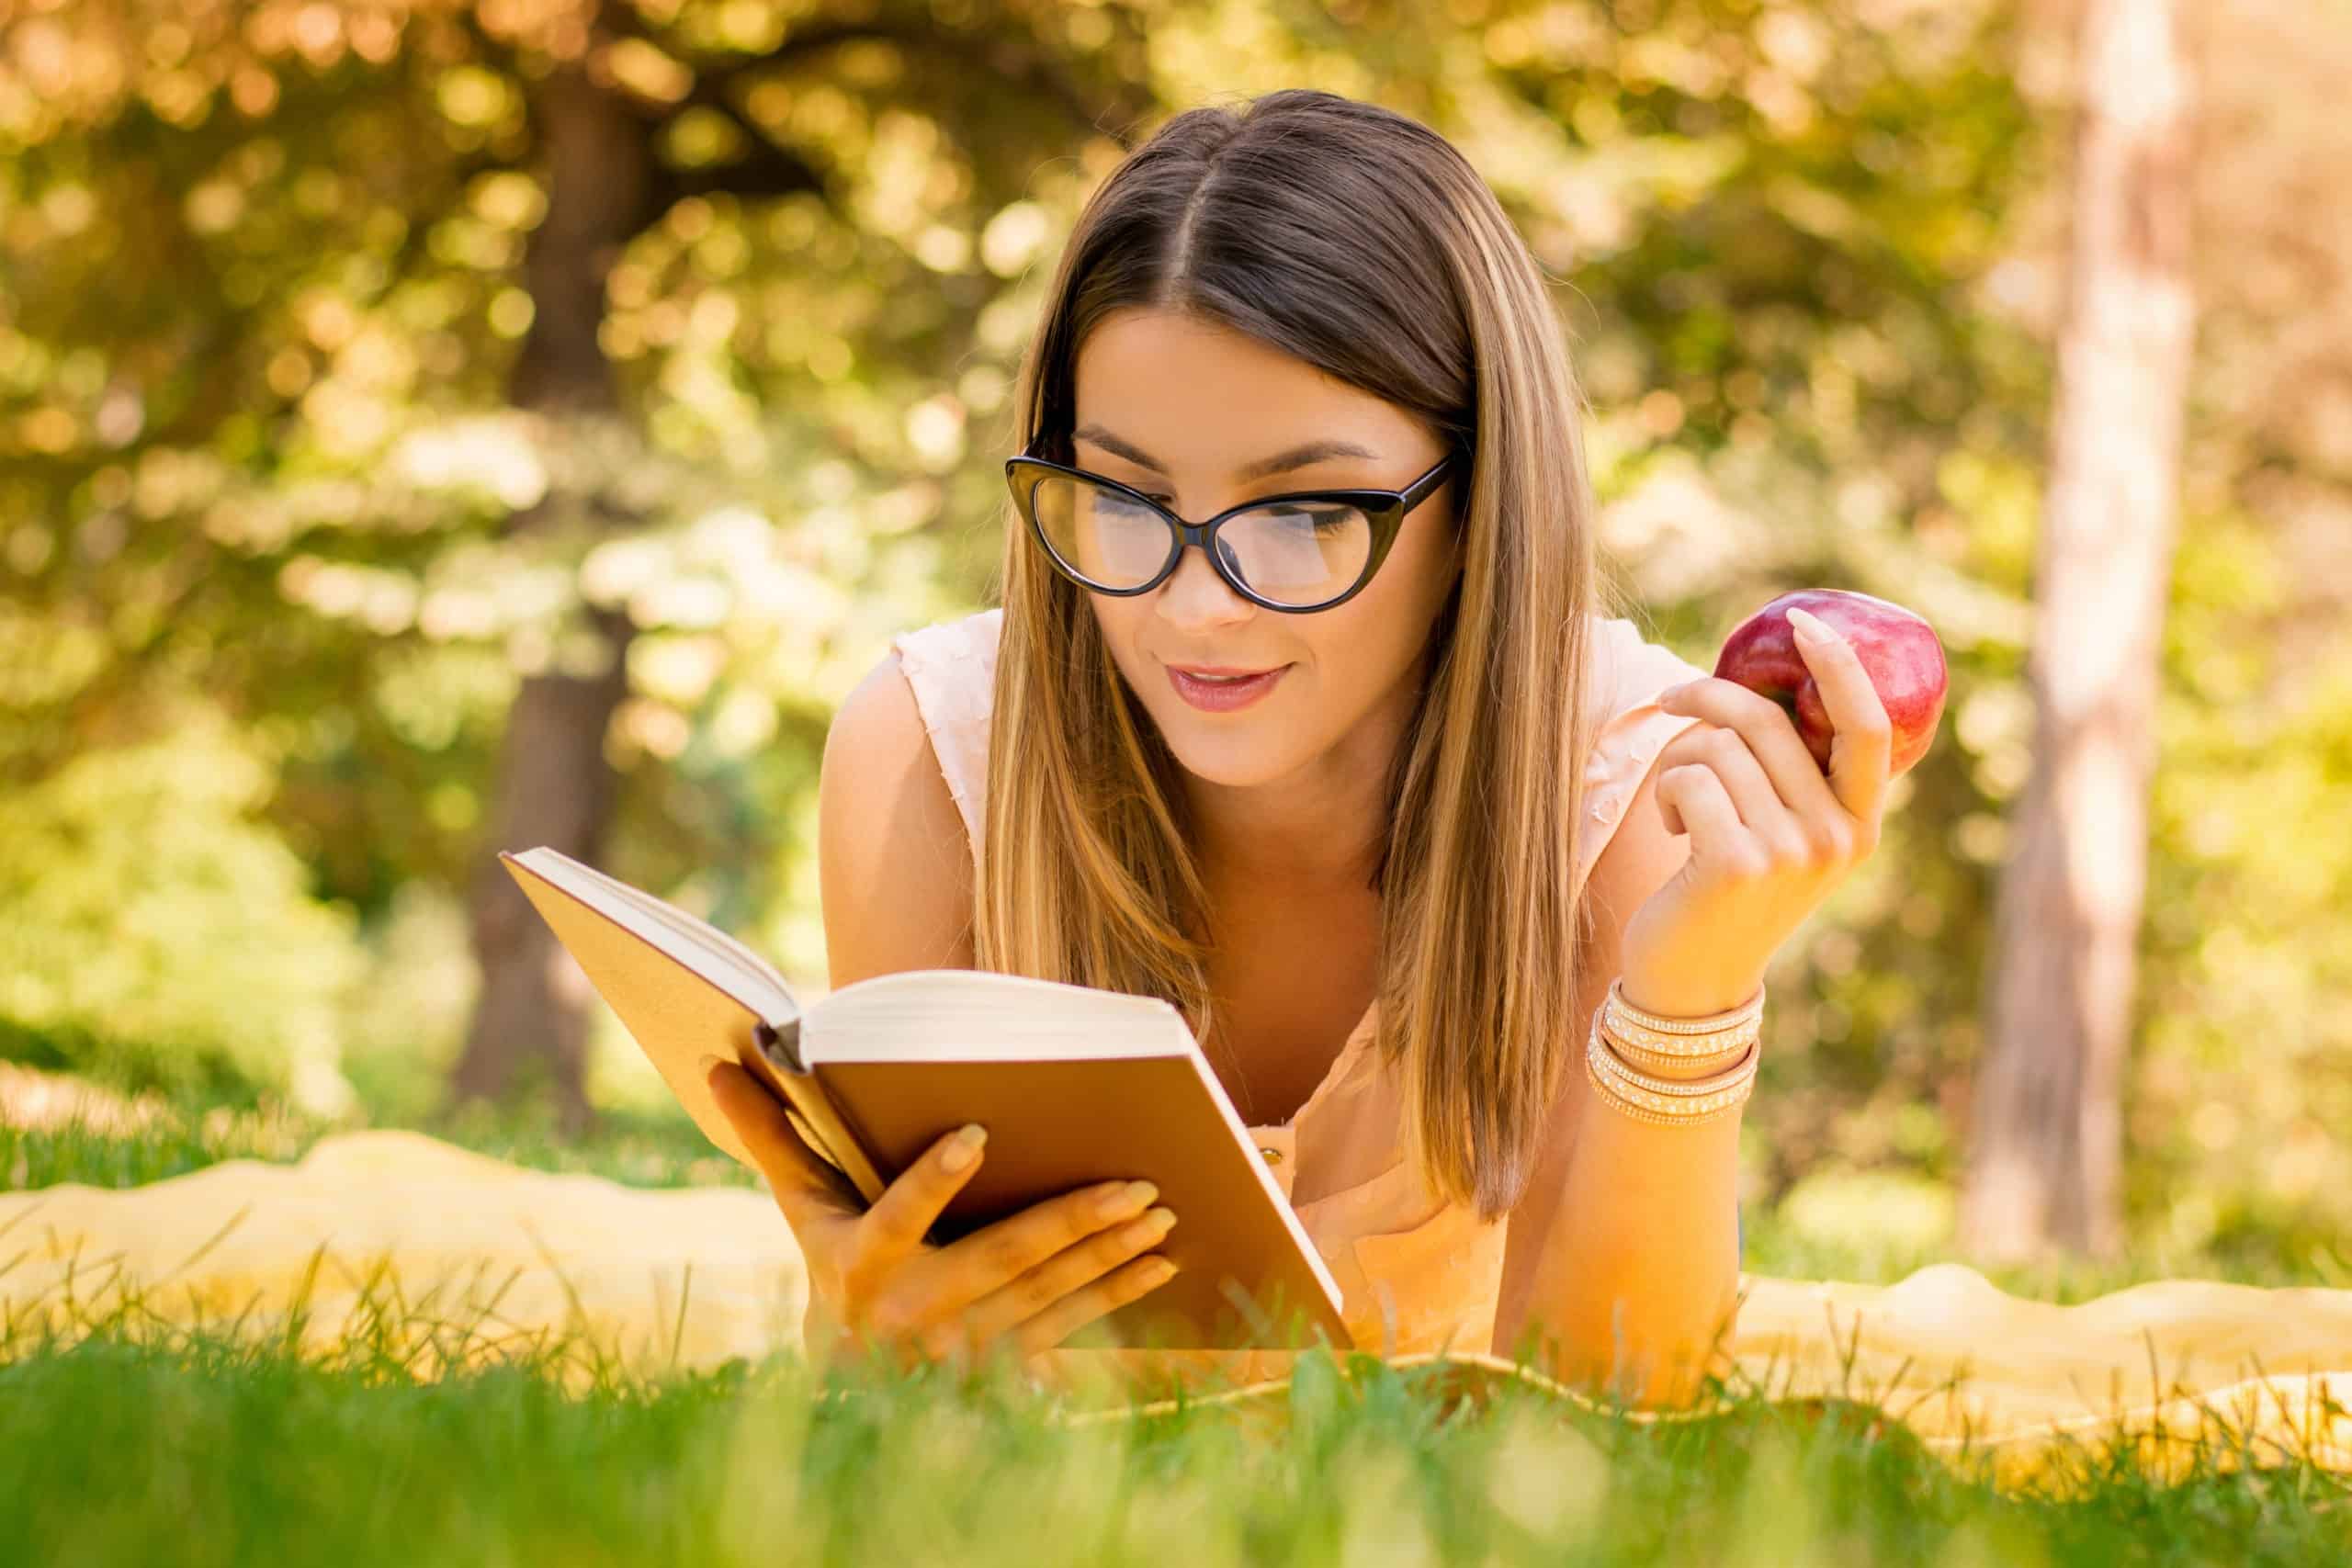 Woman reading a book and holding an apple.